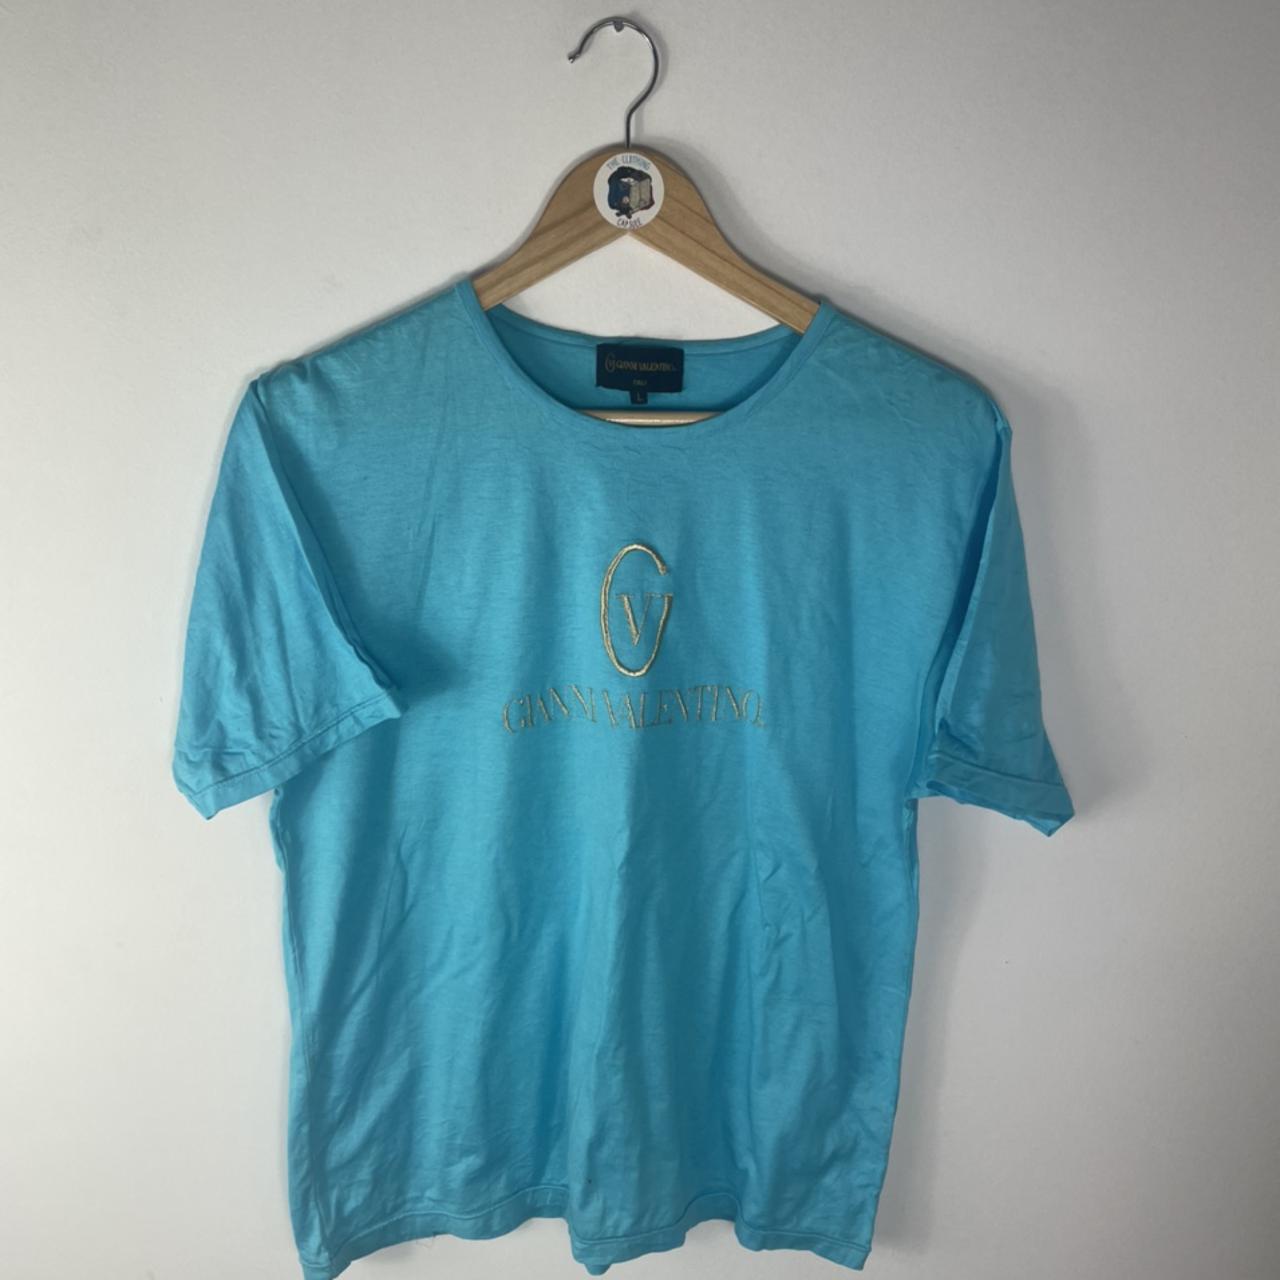 Bright Blue Gianni Valentino T-shirt with gold logo - Depop